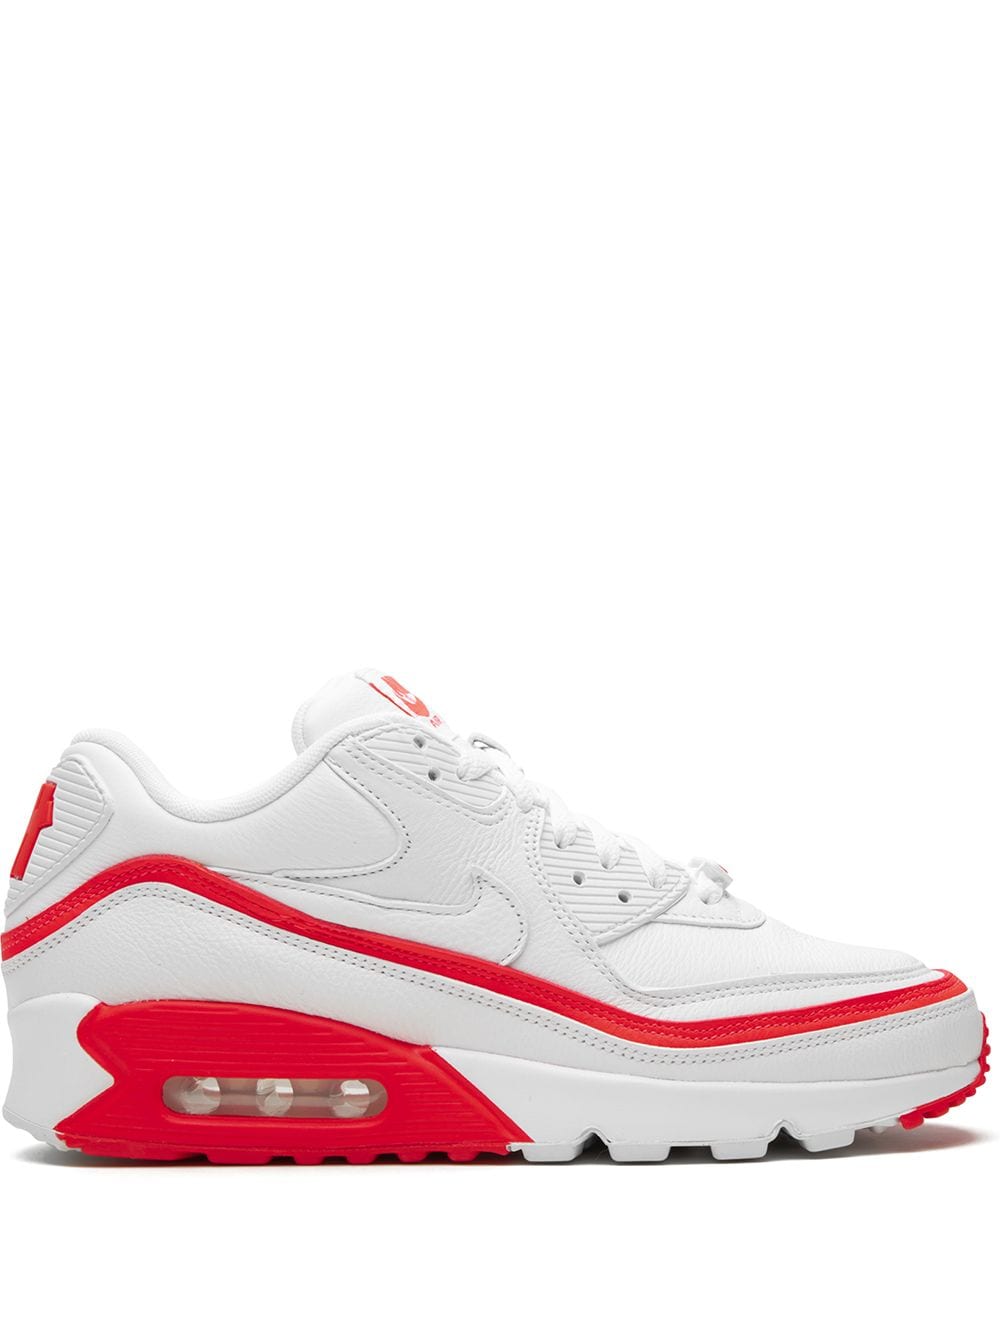 Nike Air Max 90 UNDFTD sneakers - Wit